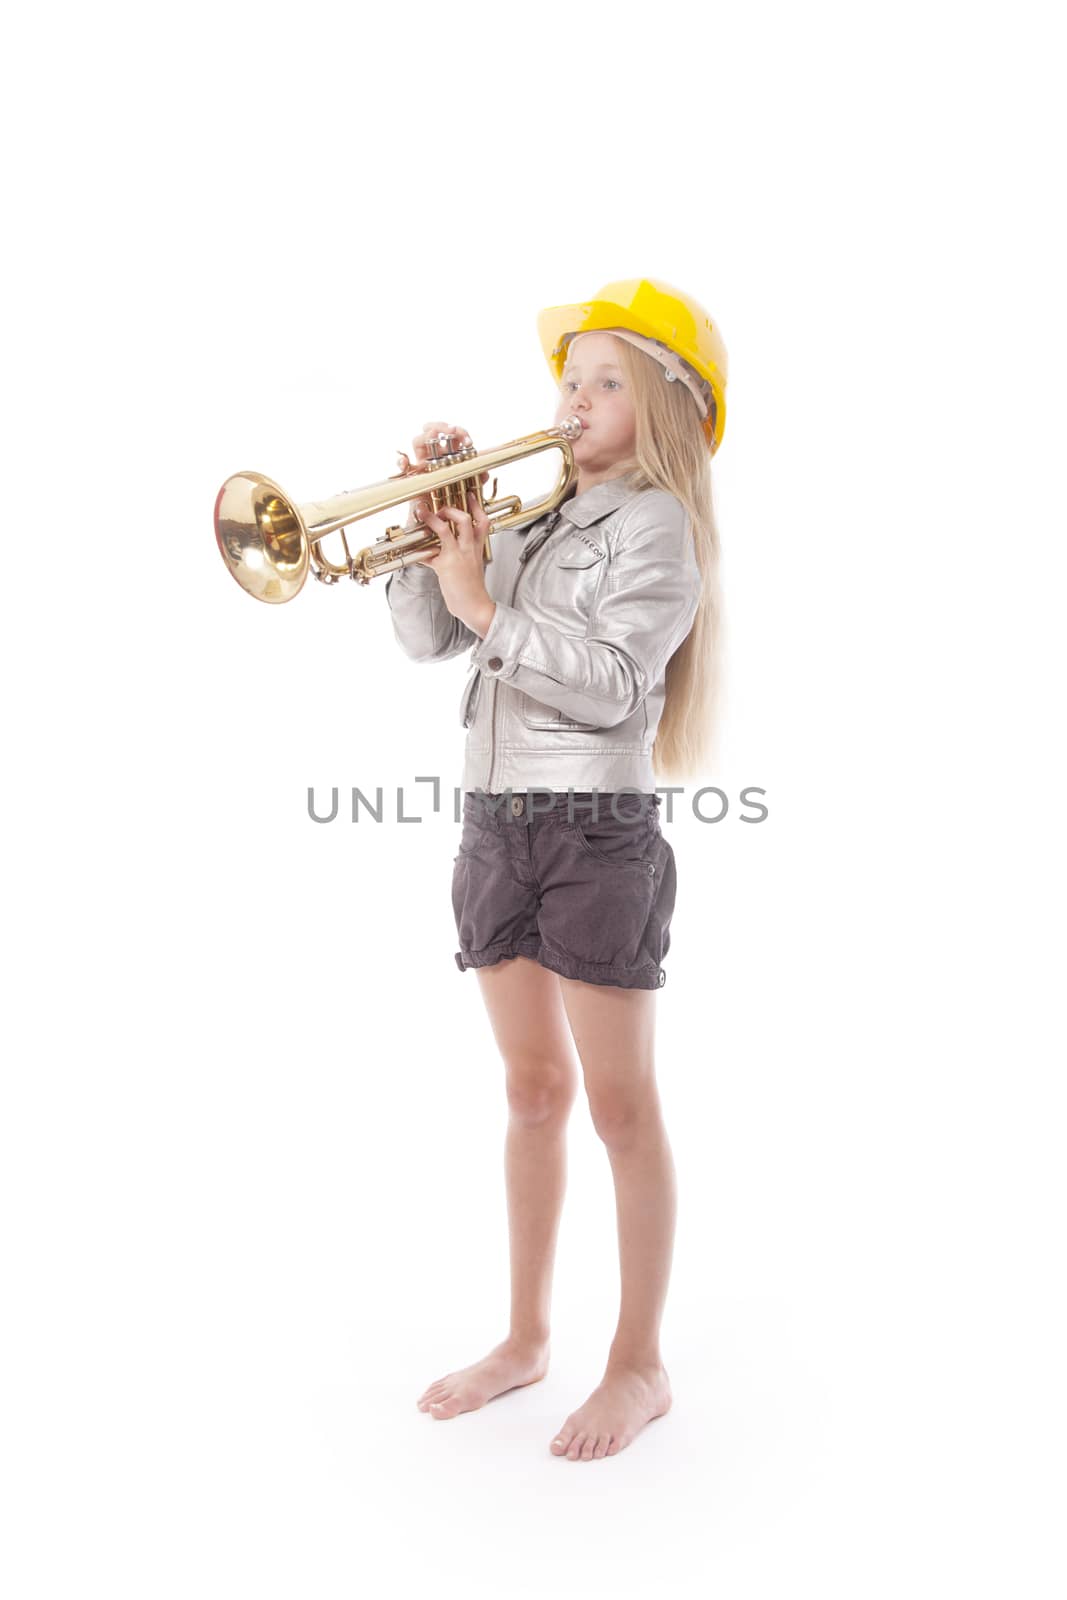 young girl with yellow helmet playing trumpet by ahavelaar